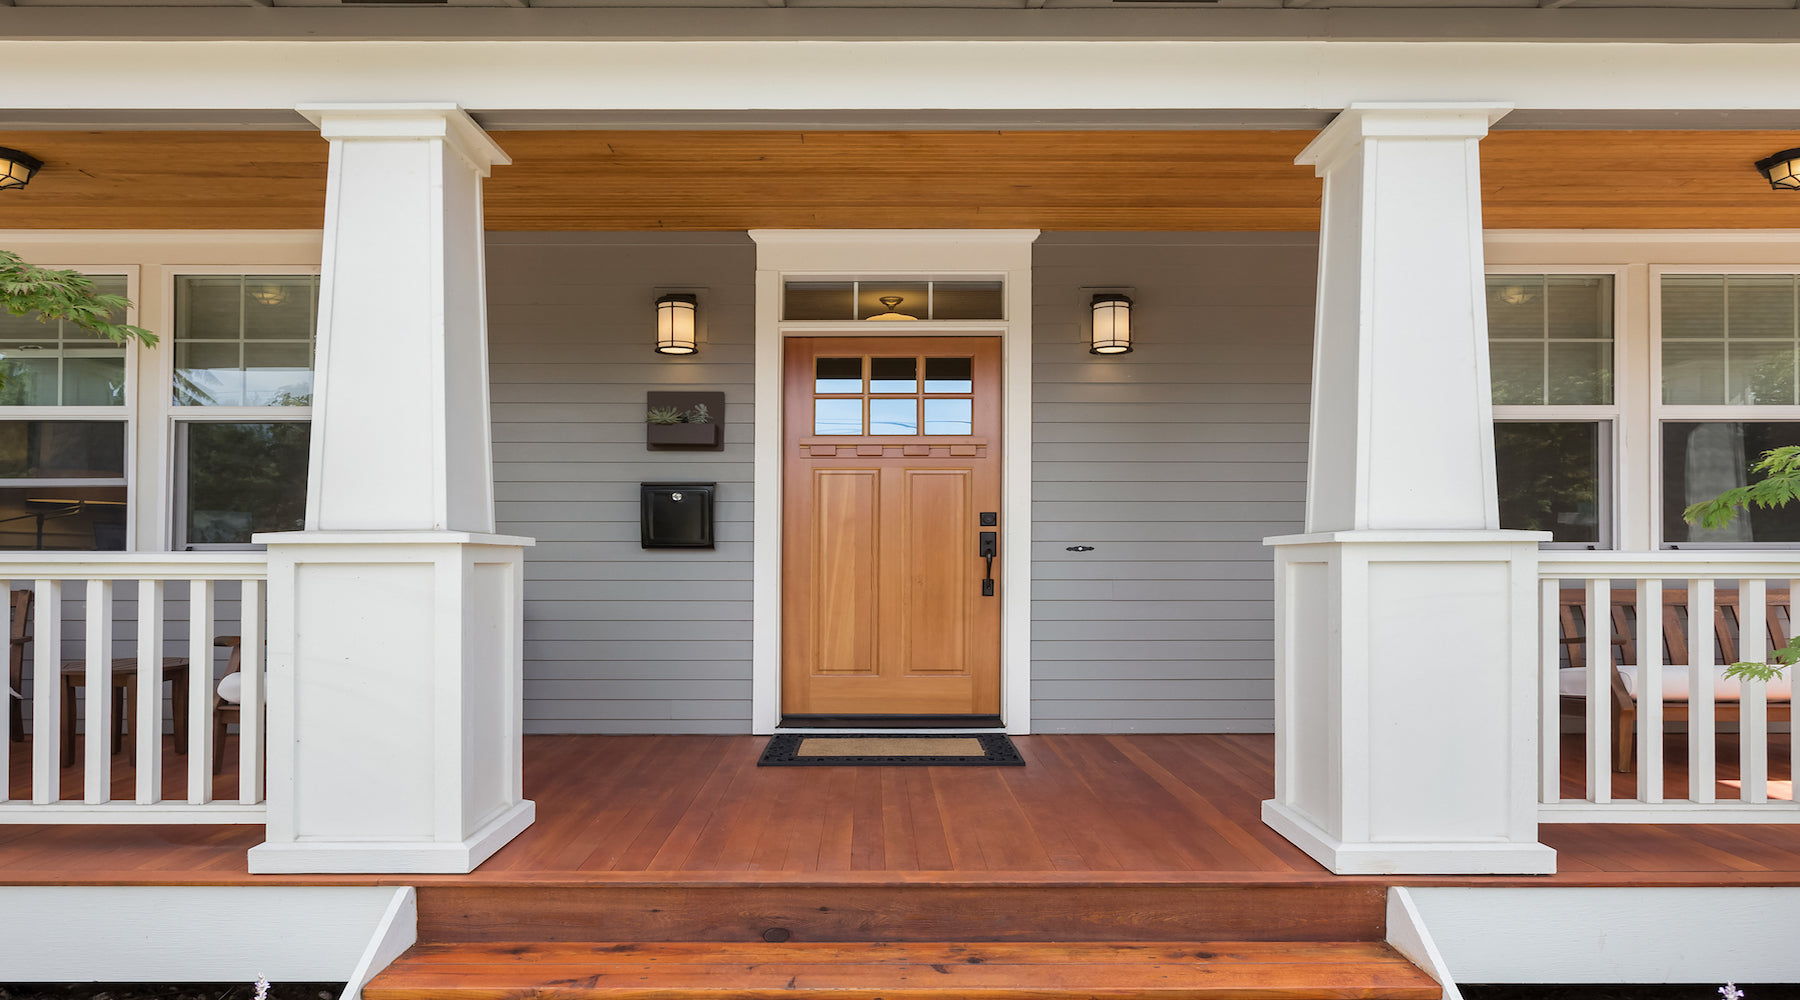 Porch lighting installed on beautiful covered front porch with wooden door